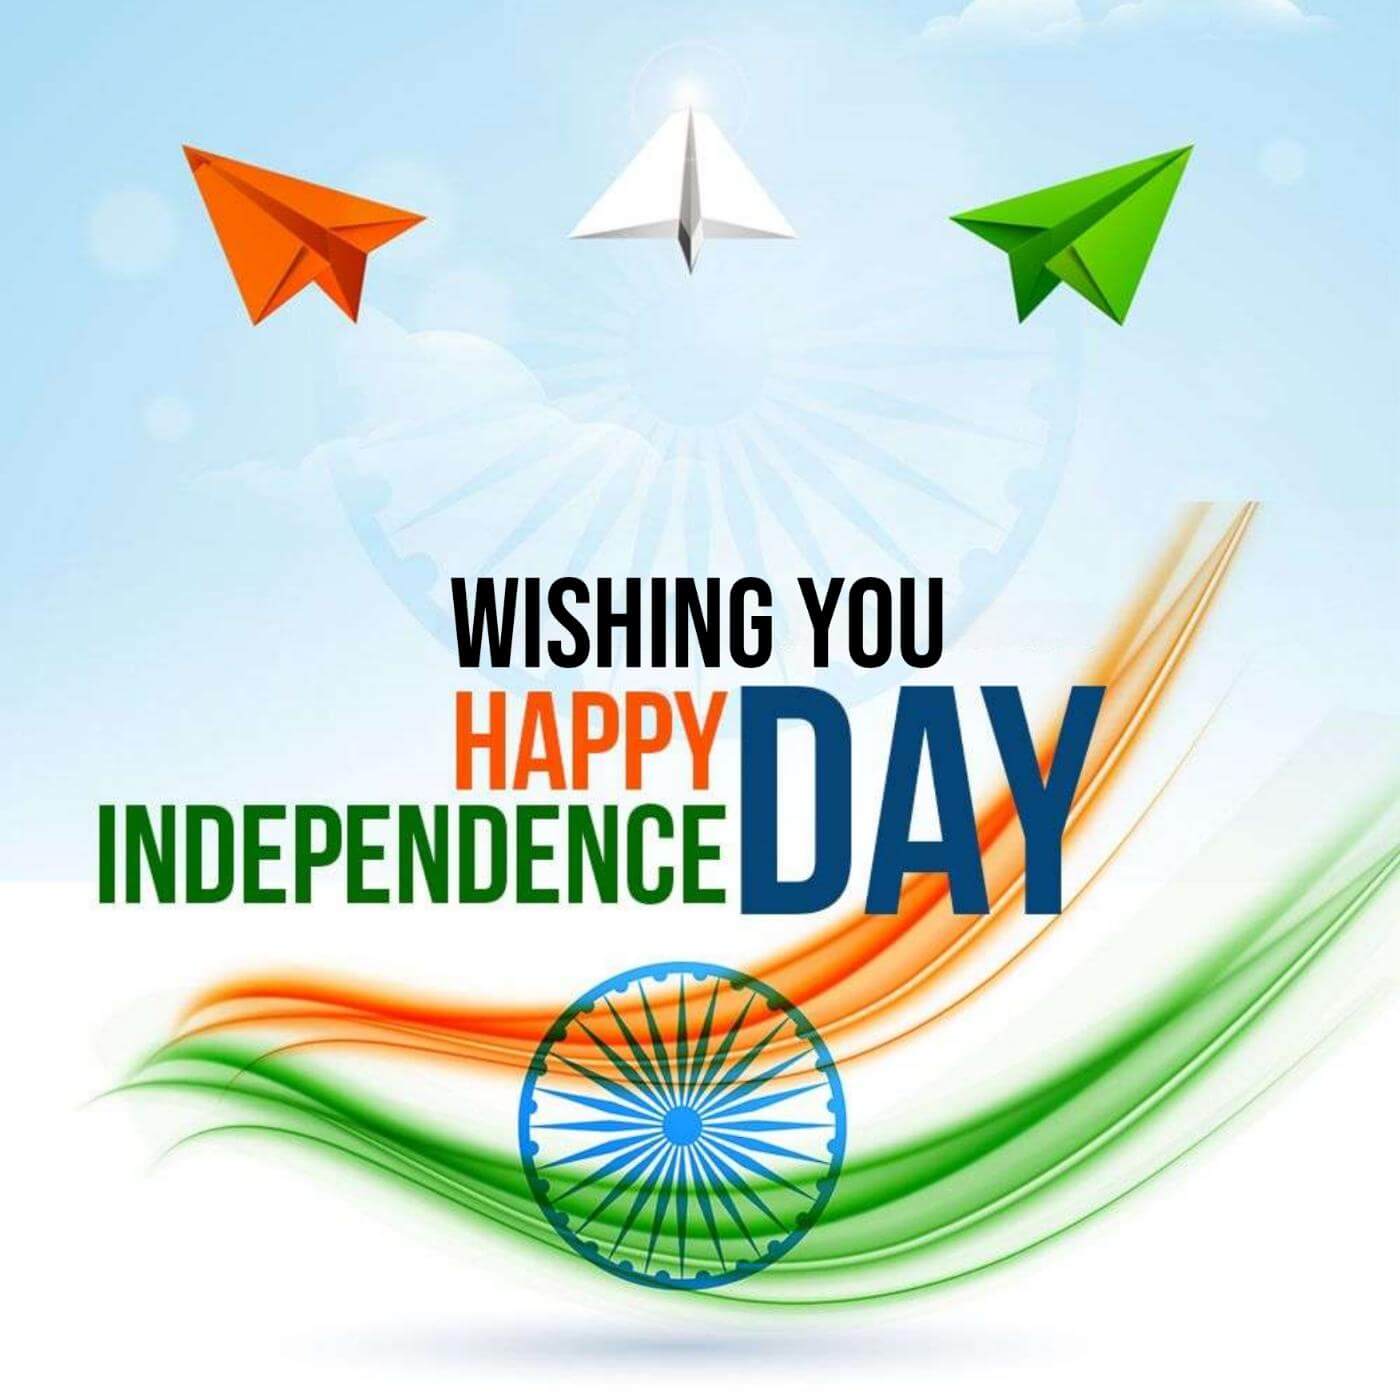 Happy Independence Day Images.